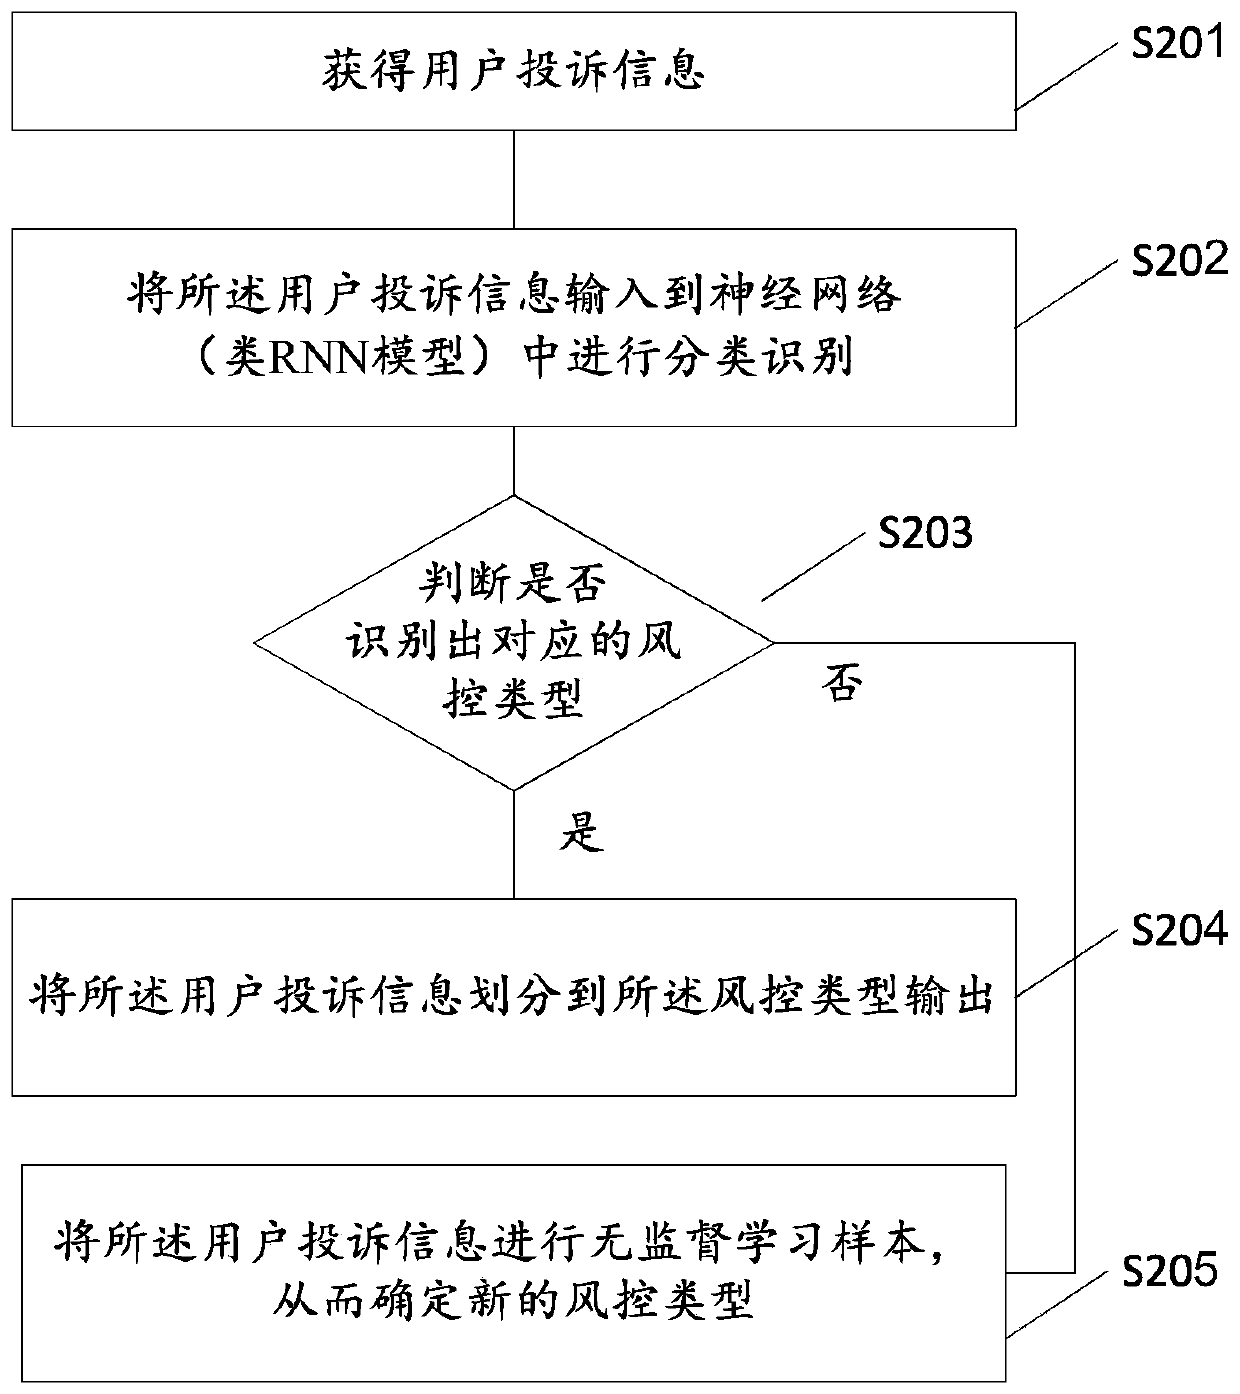 Risk control classification identification method and system for processing user complaint information